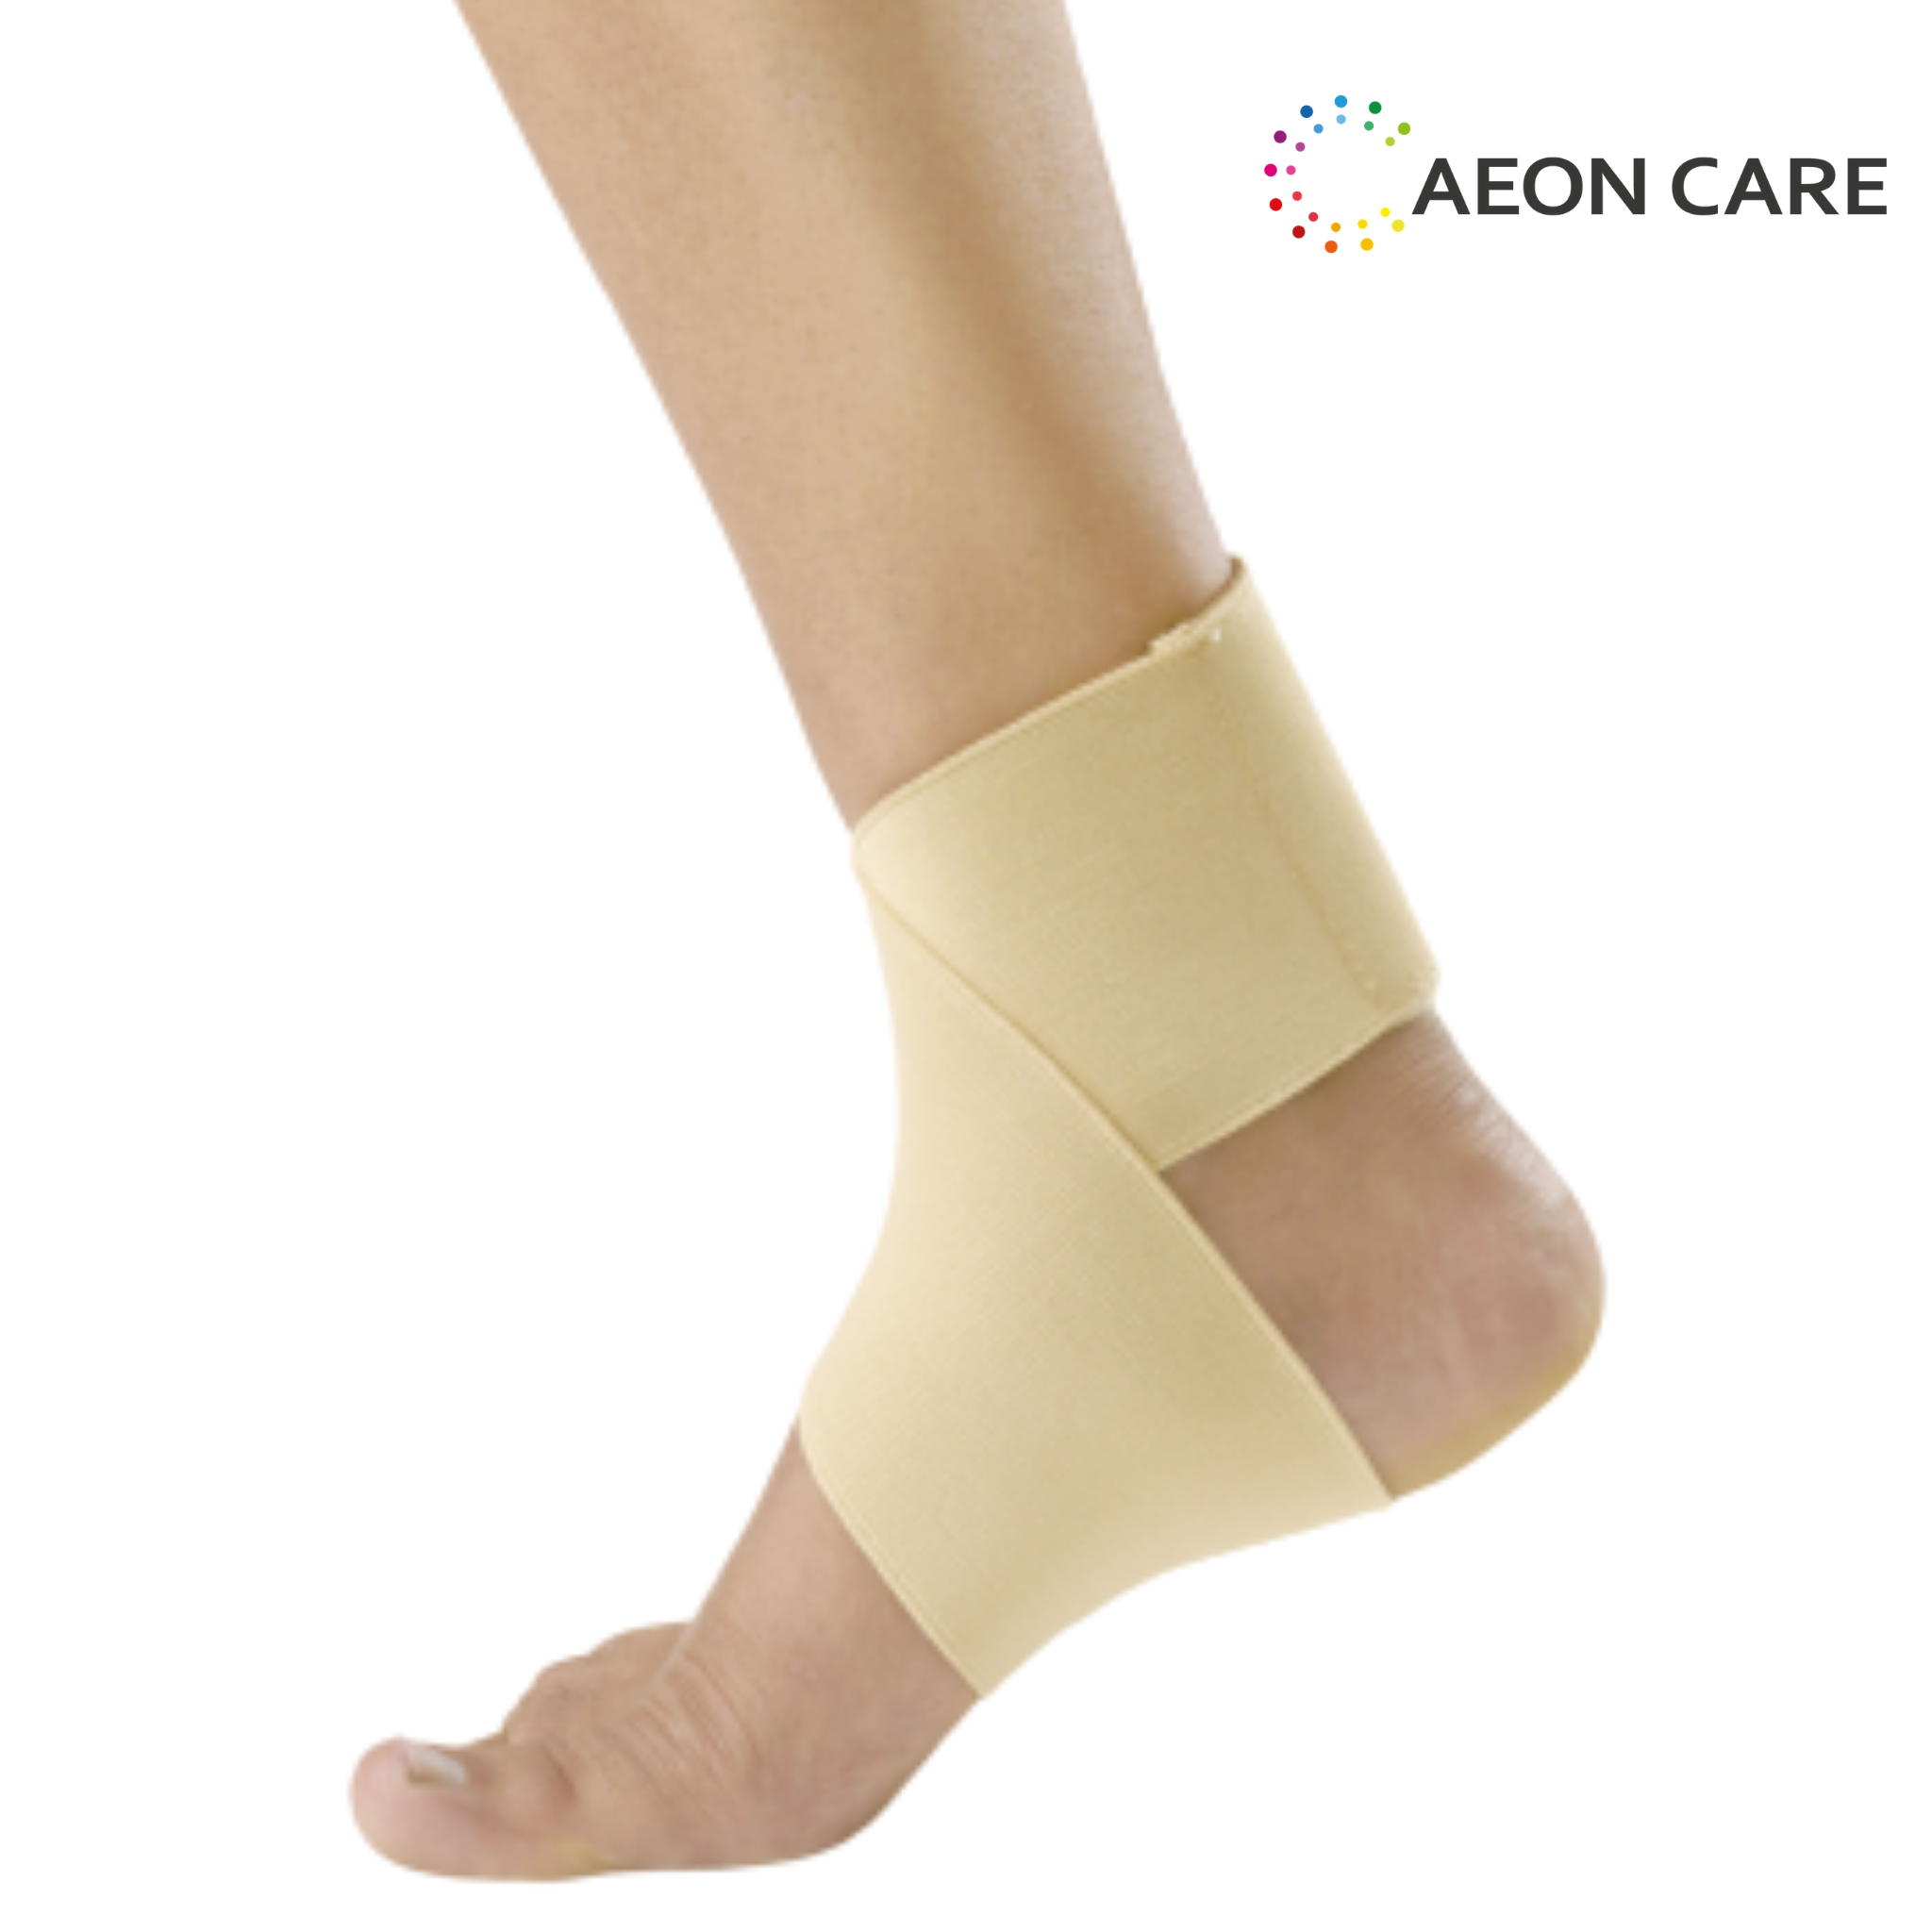 Buy Ankle Brace Online - Sego Ankle Brace at Best Price in Chennai